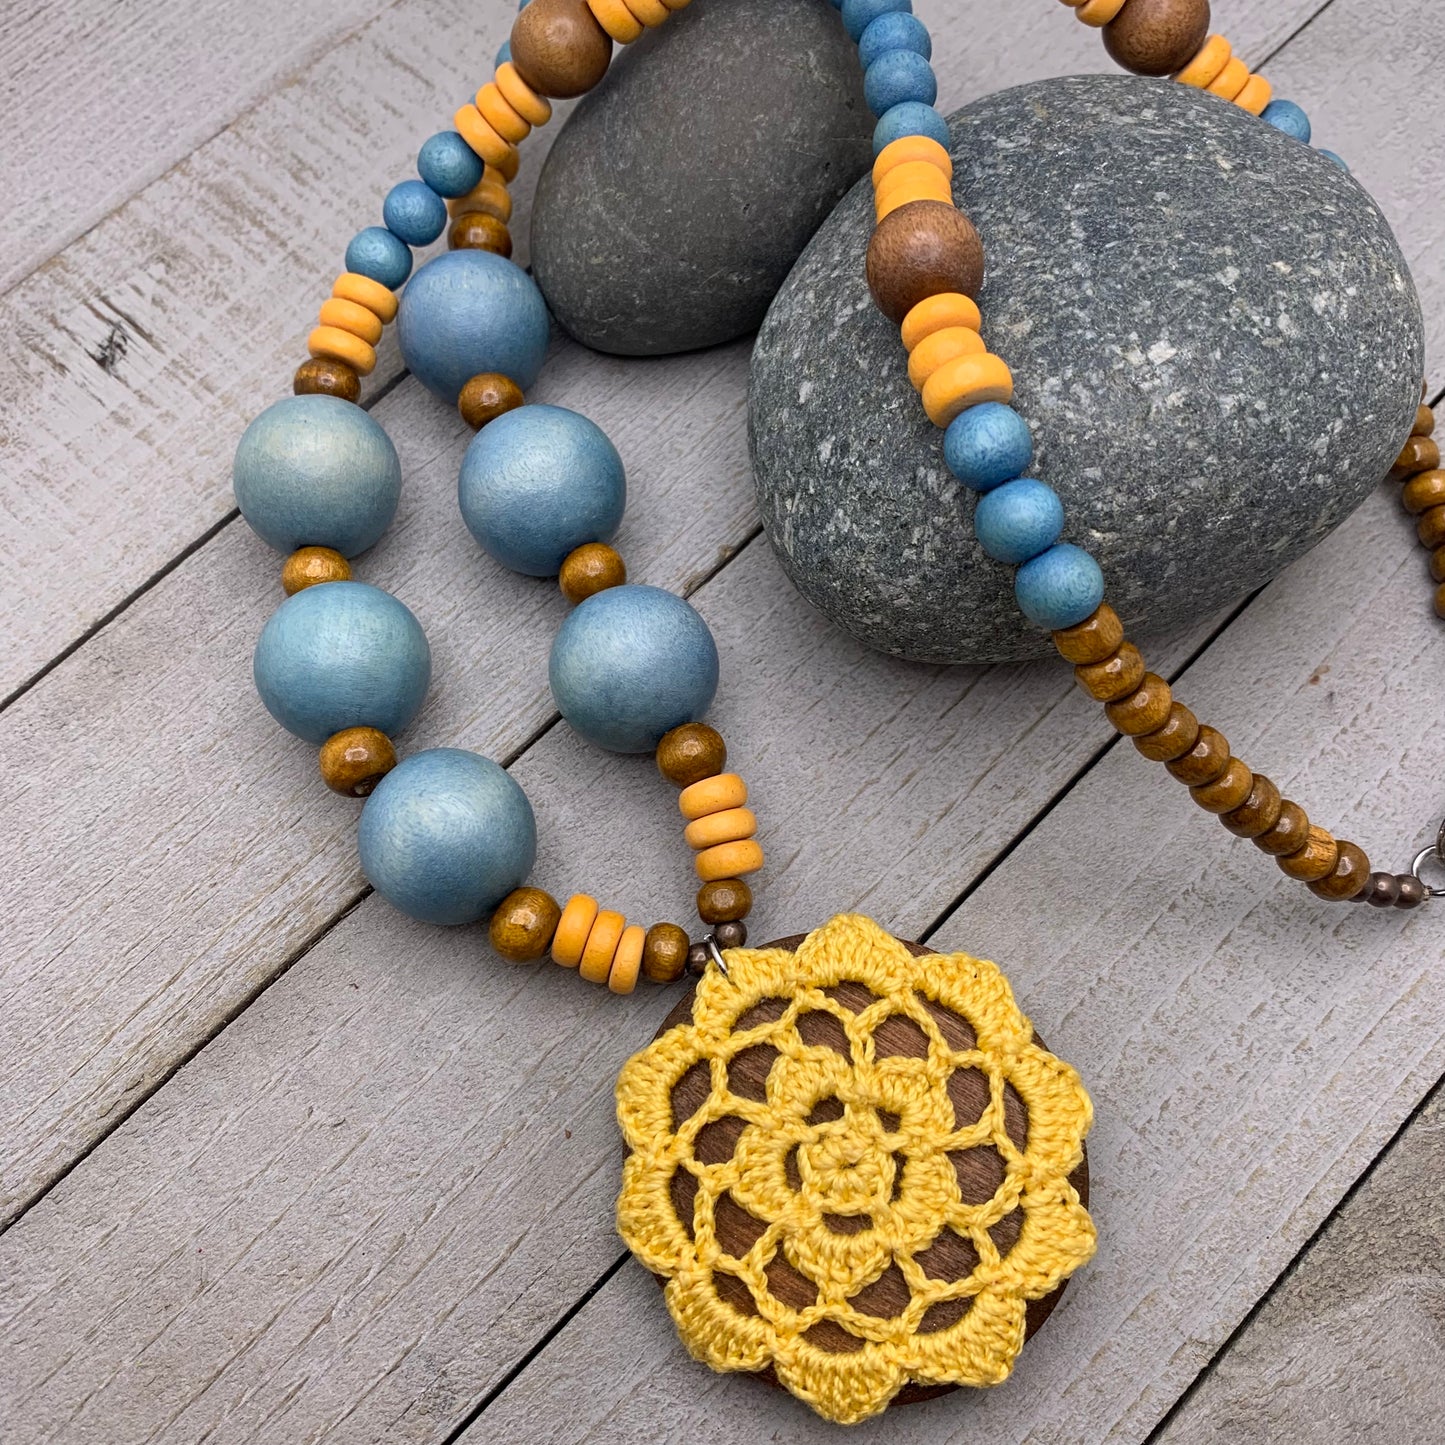 long wooden bead necklace with yellow crocheted pendant